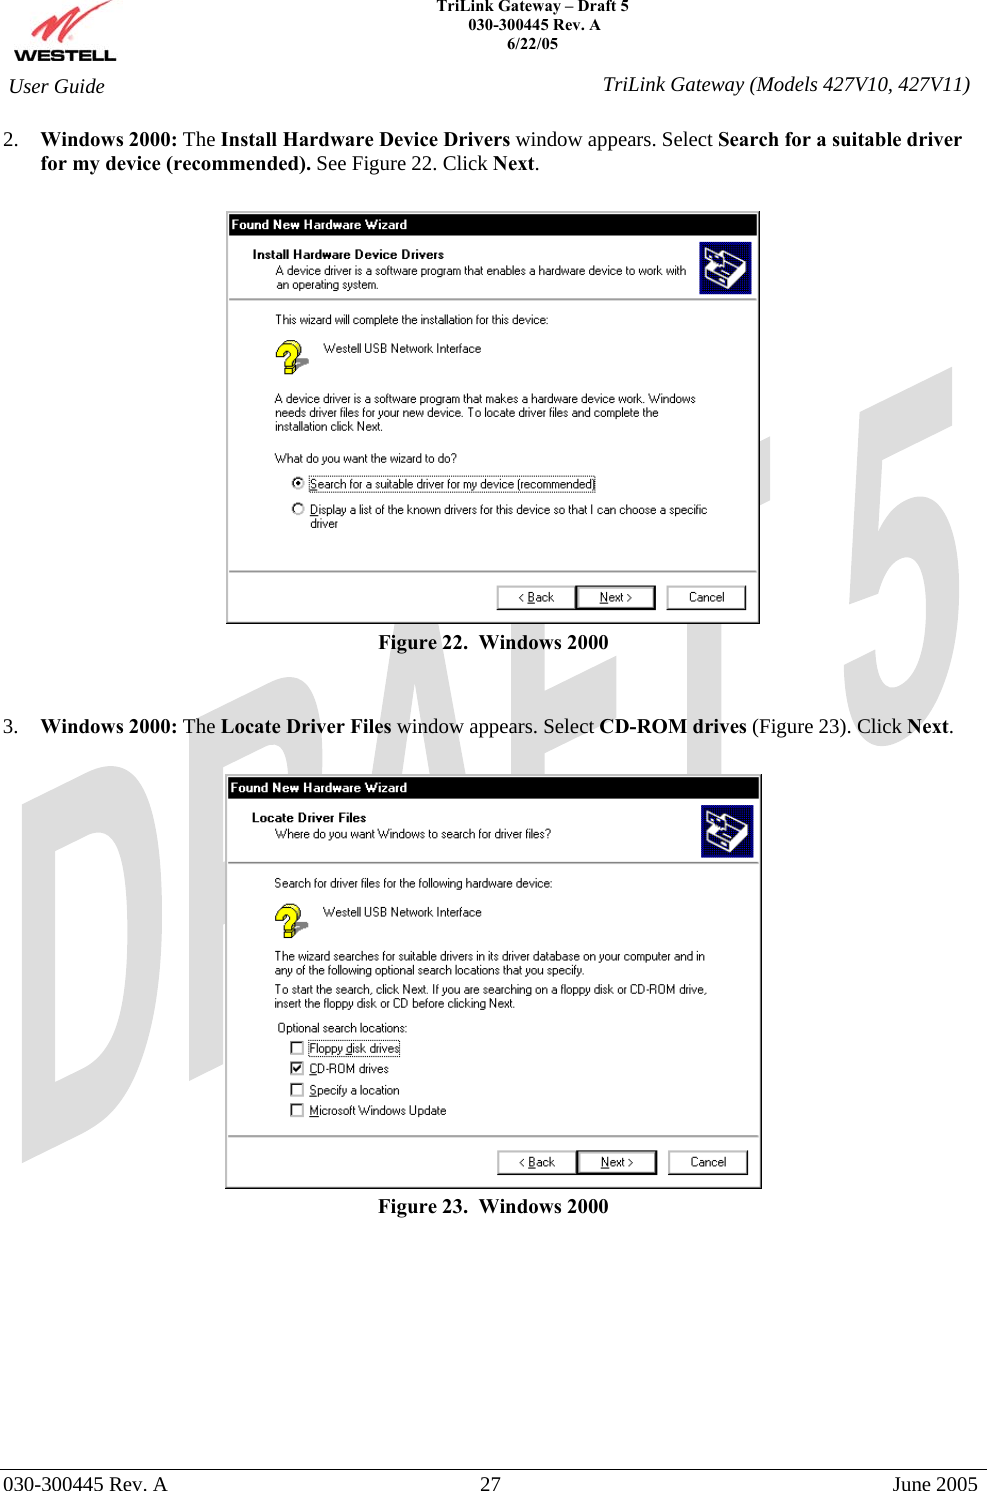    TriLink Gateway – Draft 5   030-300445 Rev. A 6/22/05   030-300445 Rev. A  27  June 2005  User Guide  TriLink Gateway (Models 427V10, 427V11)2.  Windows 2000: The Install Hardware Device Drivers window appears. Select Search for a suitable driver for my device (recommended). See Figure 22. Click Next.   Figure 22.  Windows 2000   3.  Windows 2000: The Locate Driver Files window appears. Select CD-ROM drives (Figure 23). Click Next.   Figure 23.  Windows 2000         